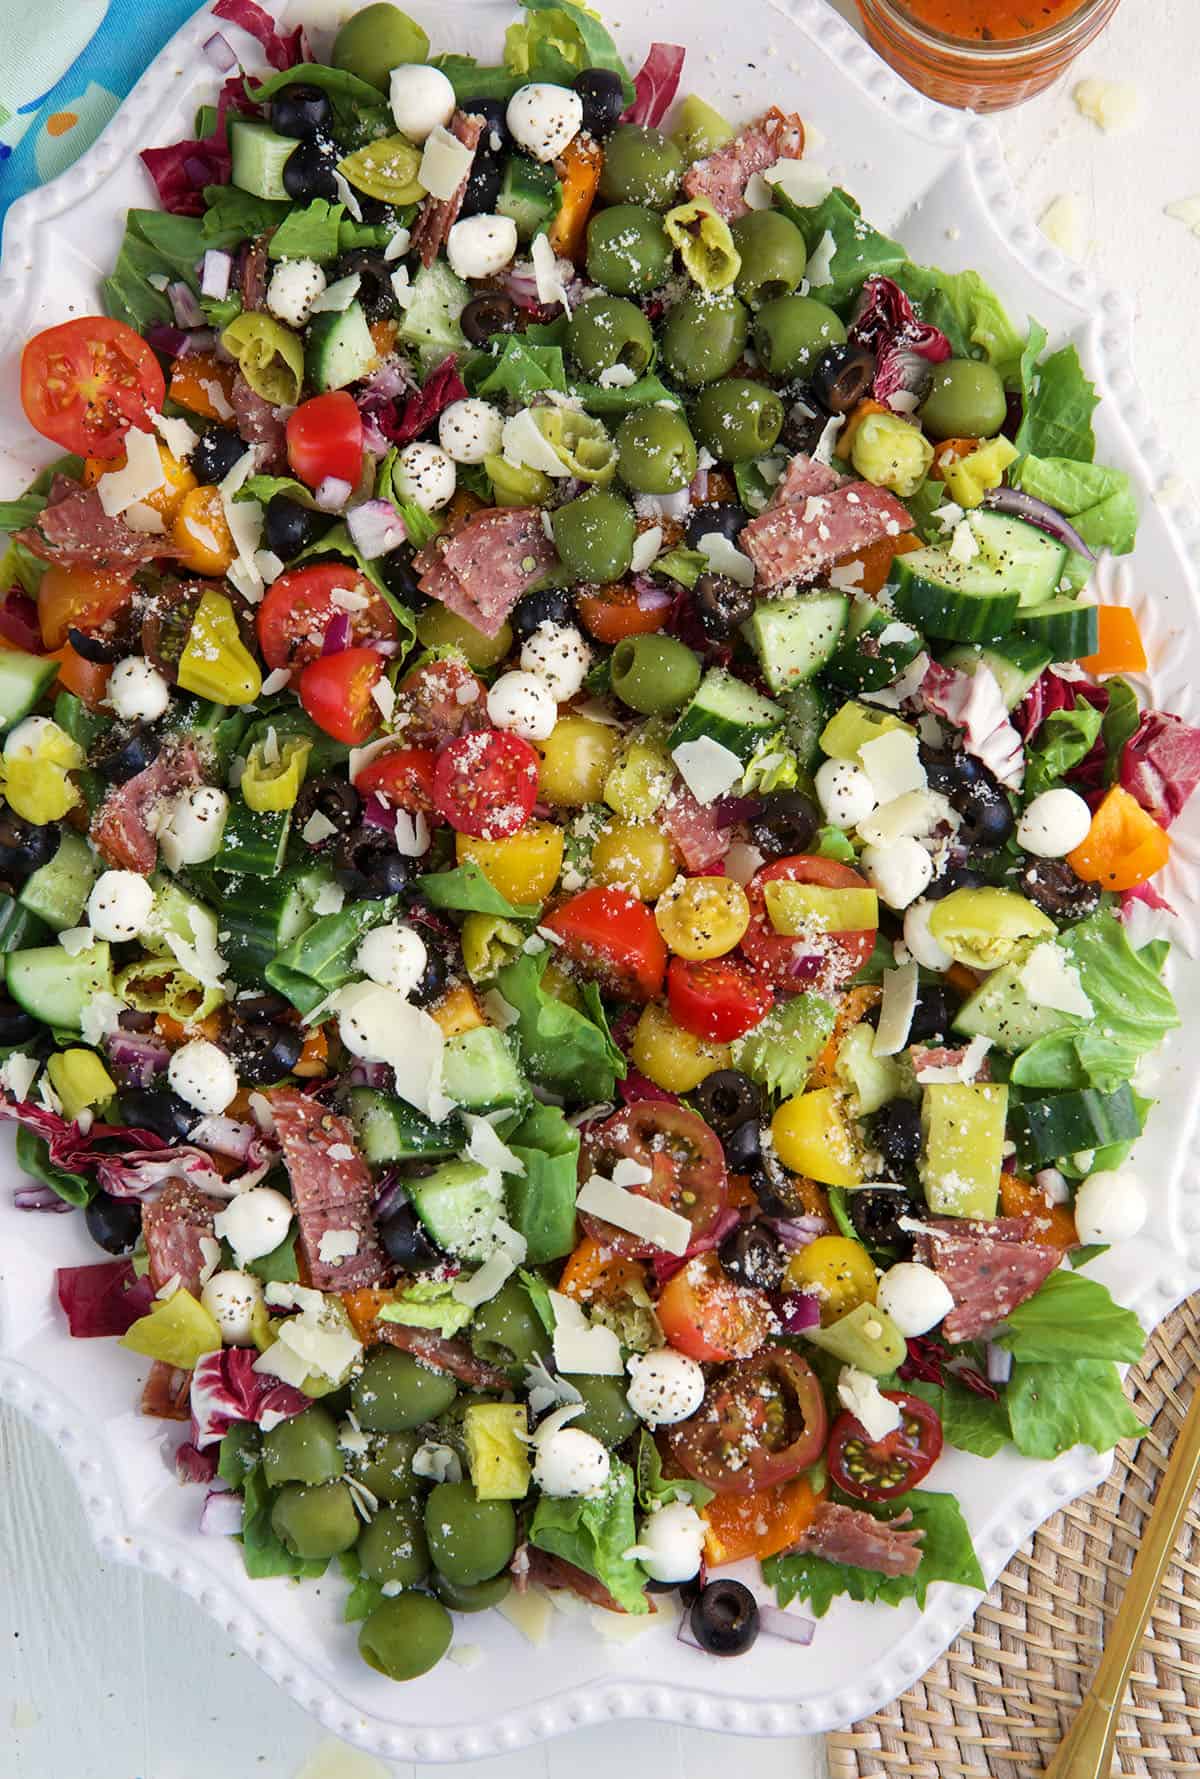 A large serving platter is filled with chopped salad.